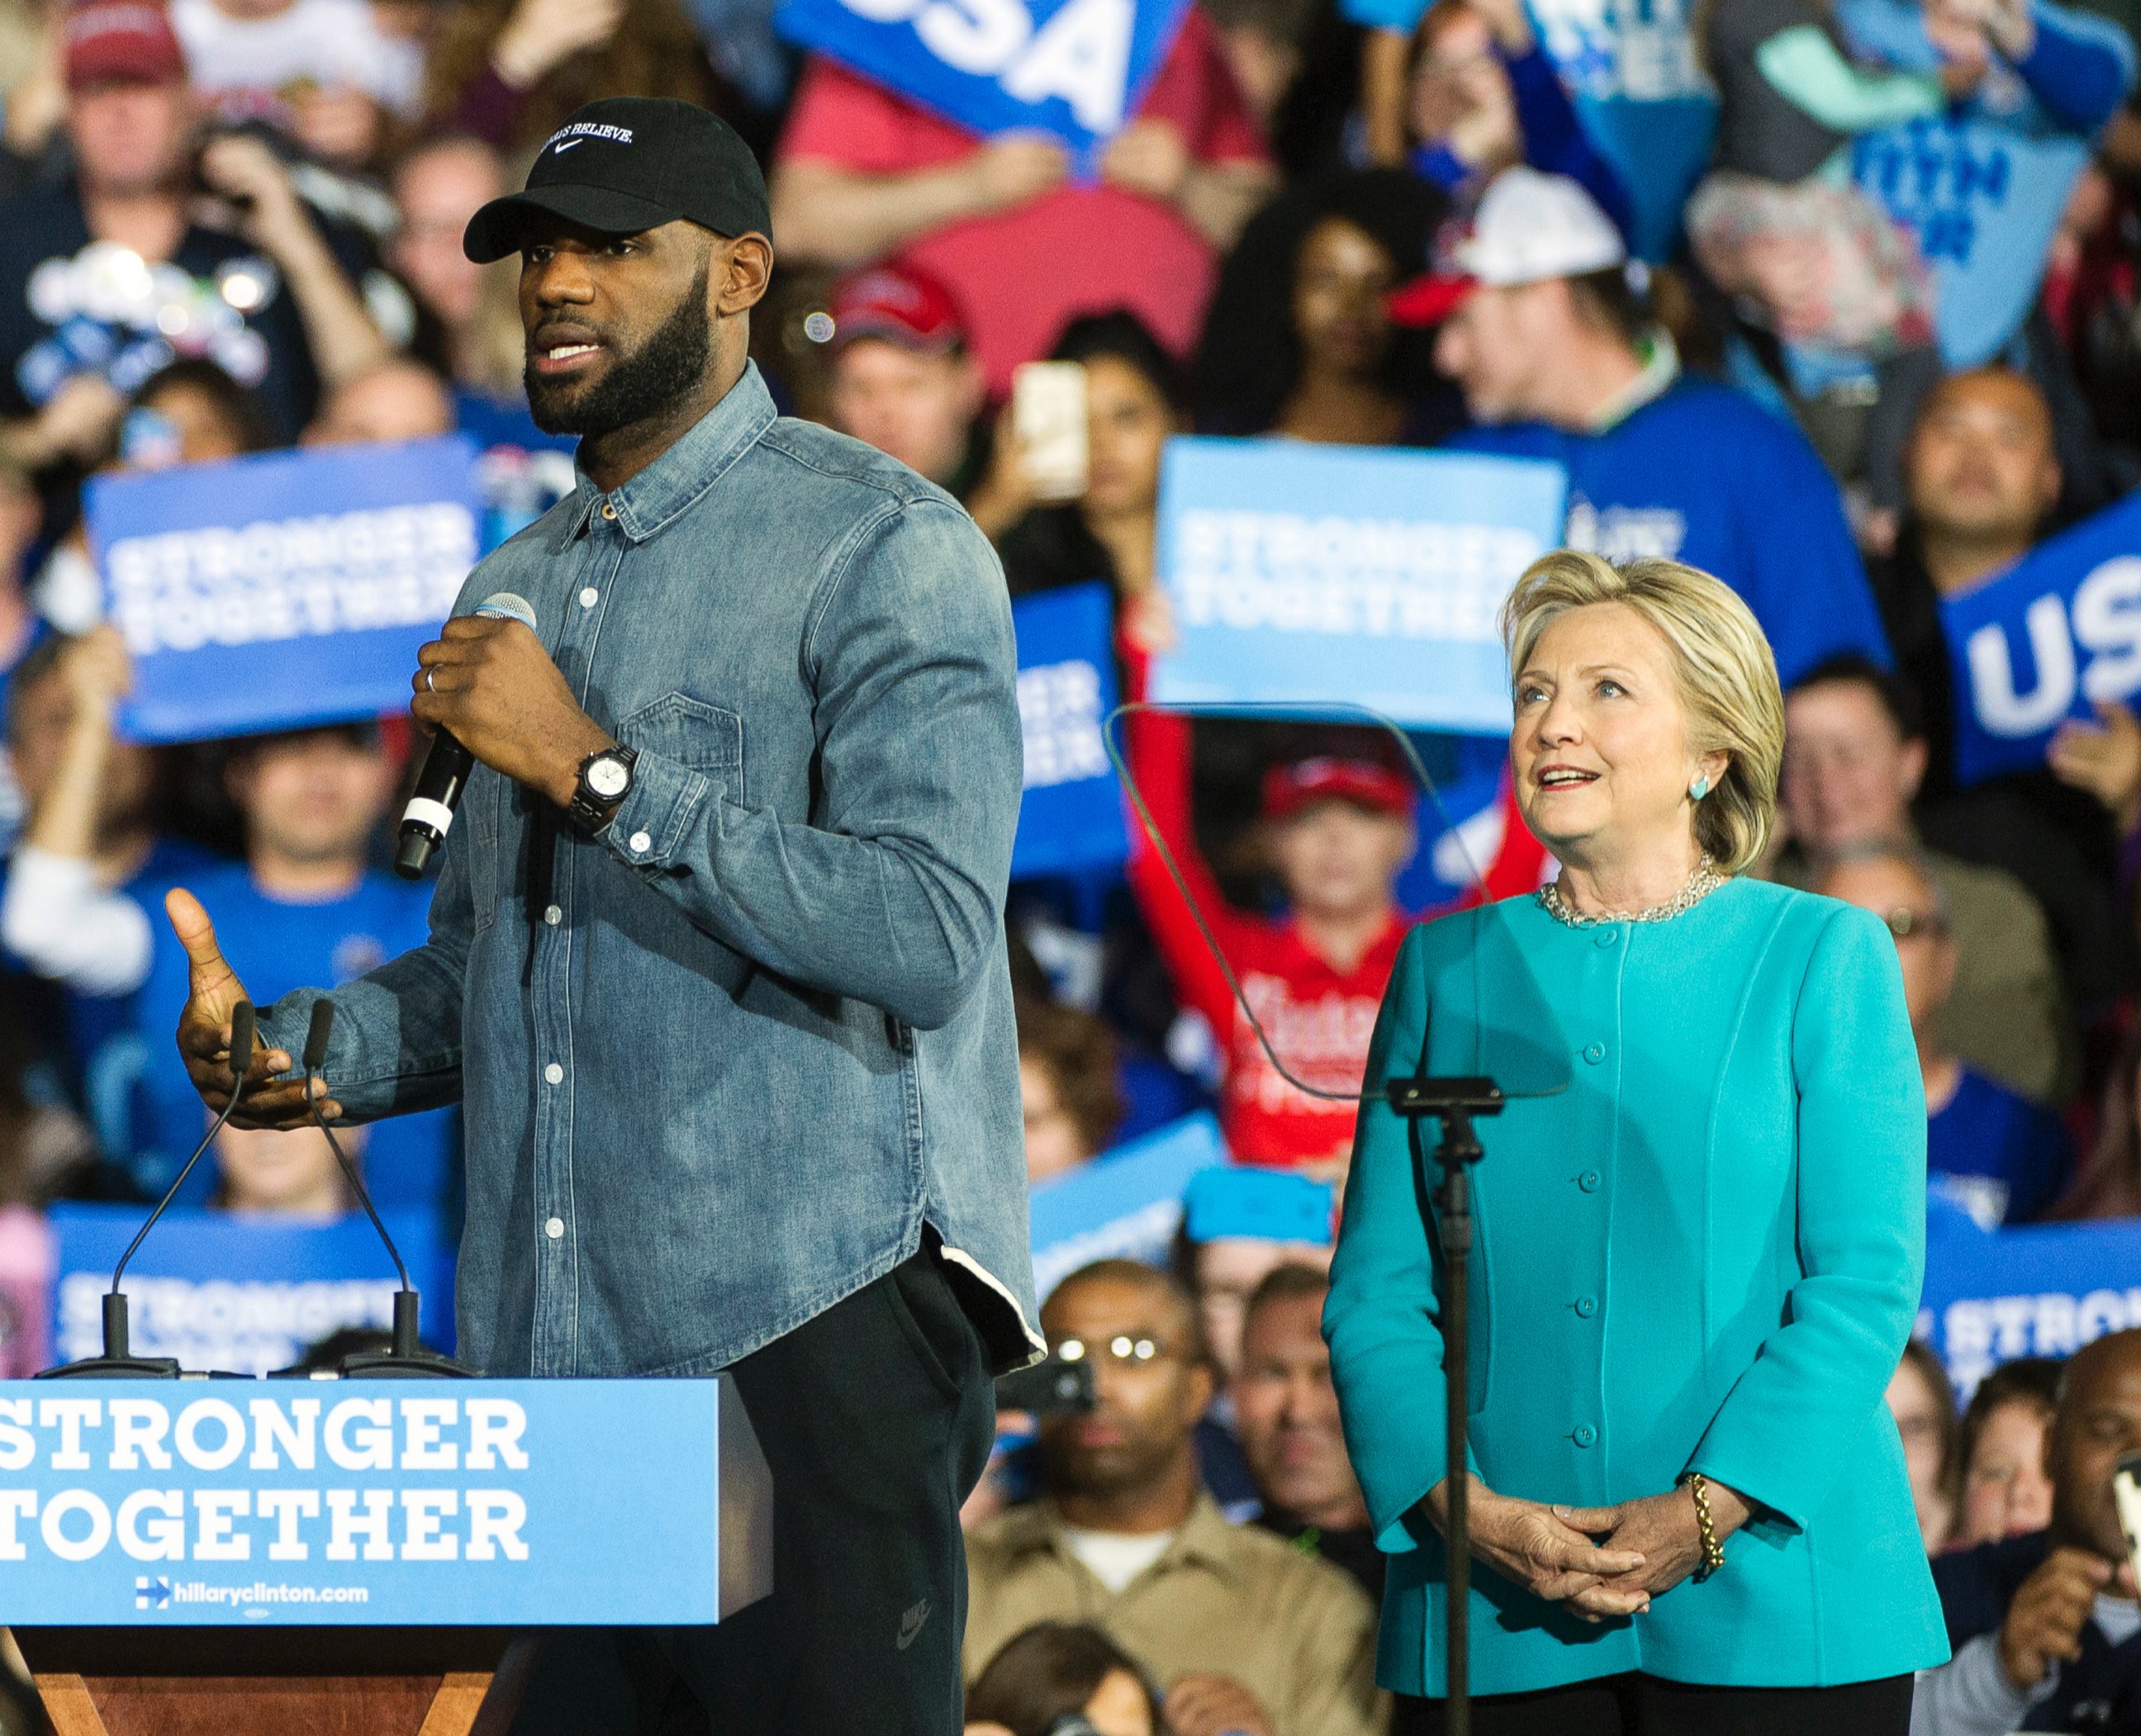 Cleveland Cavaliers star LeBron James speaks as Democratic presidential candidate Hillary Clinton listens during a campaign stop at Cleveland Public Hall in Cleveland, Sunday, Nov. 6, 2016.